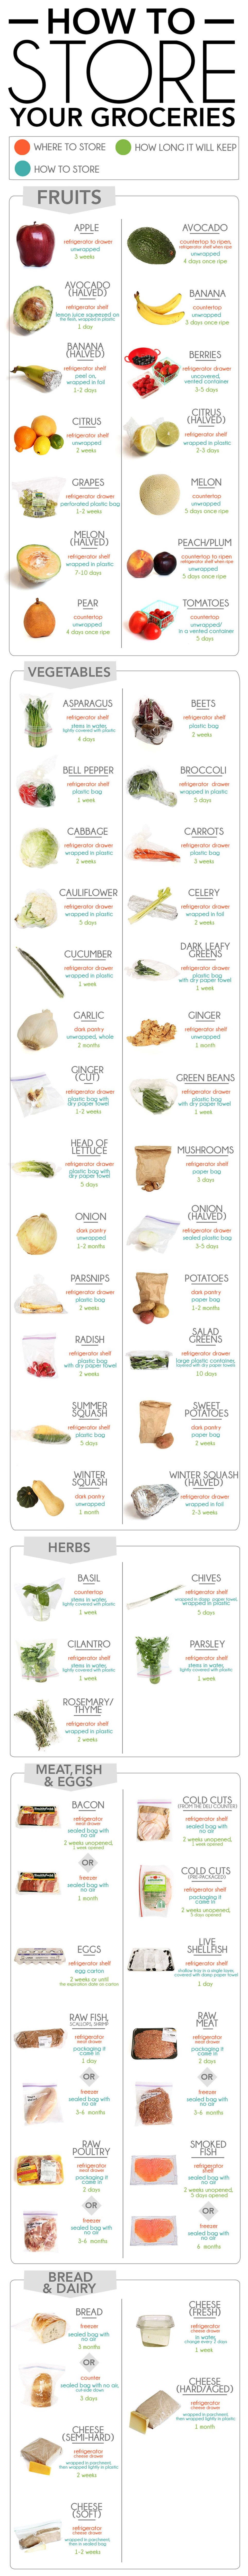 Gorgeous Grocery Infographic